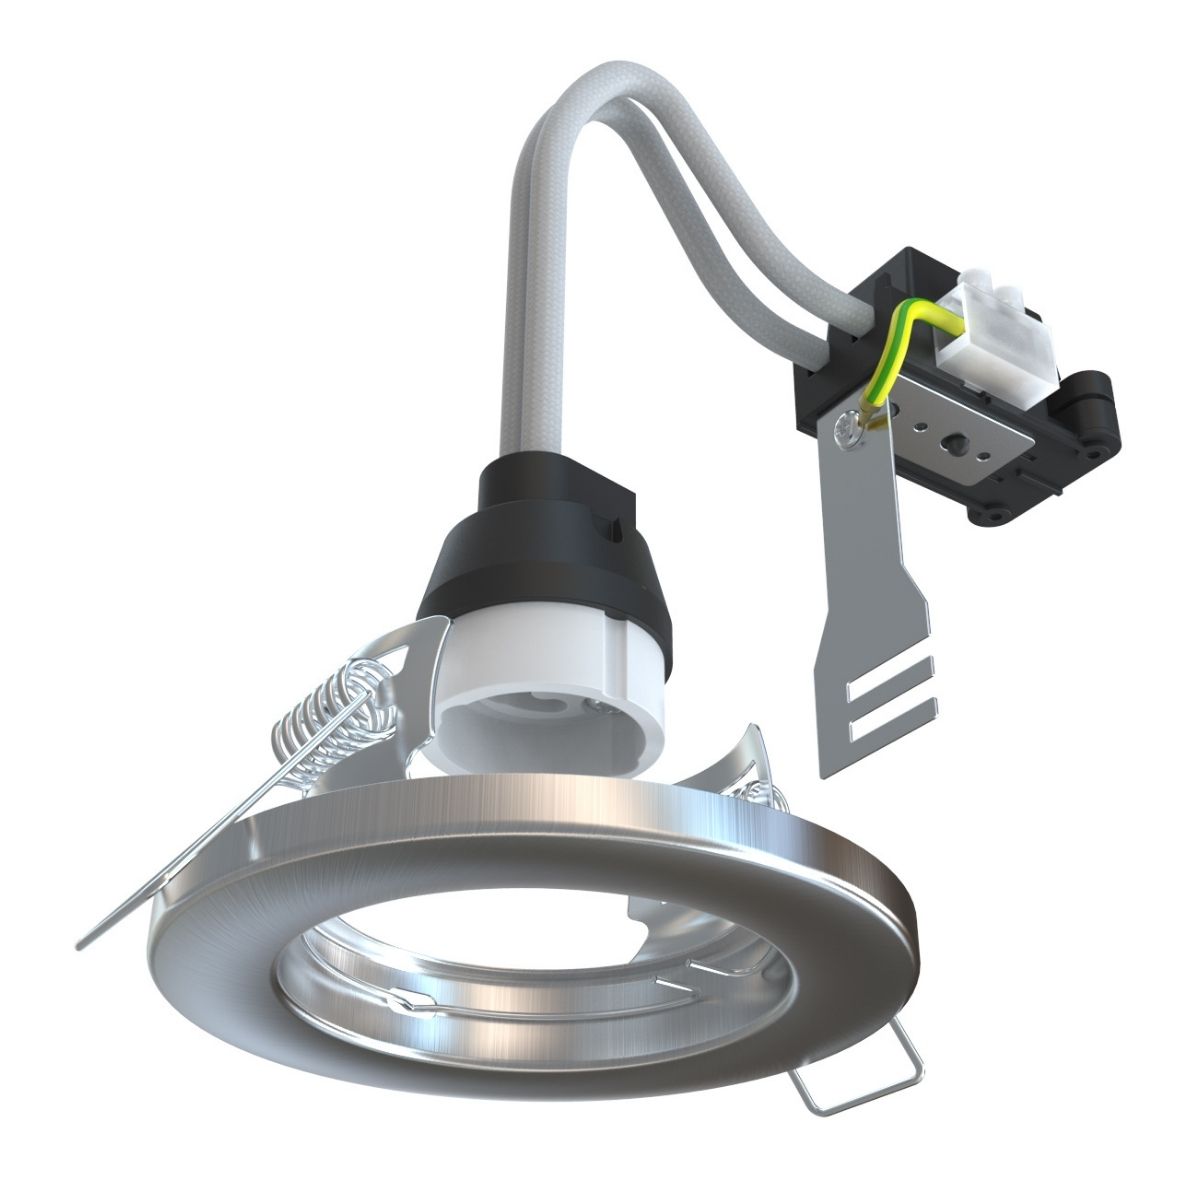 View Recessed Fixed Downlight GU10 in Chrome White or Brushed Chrome information